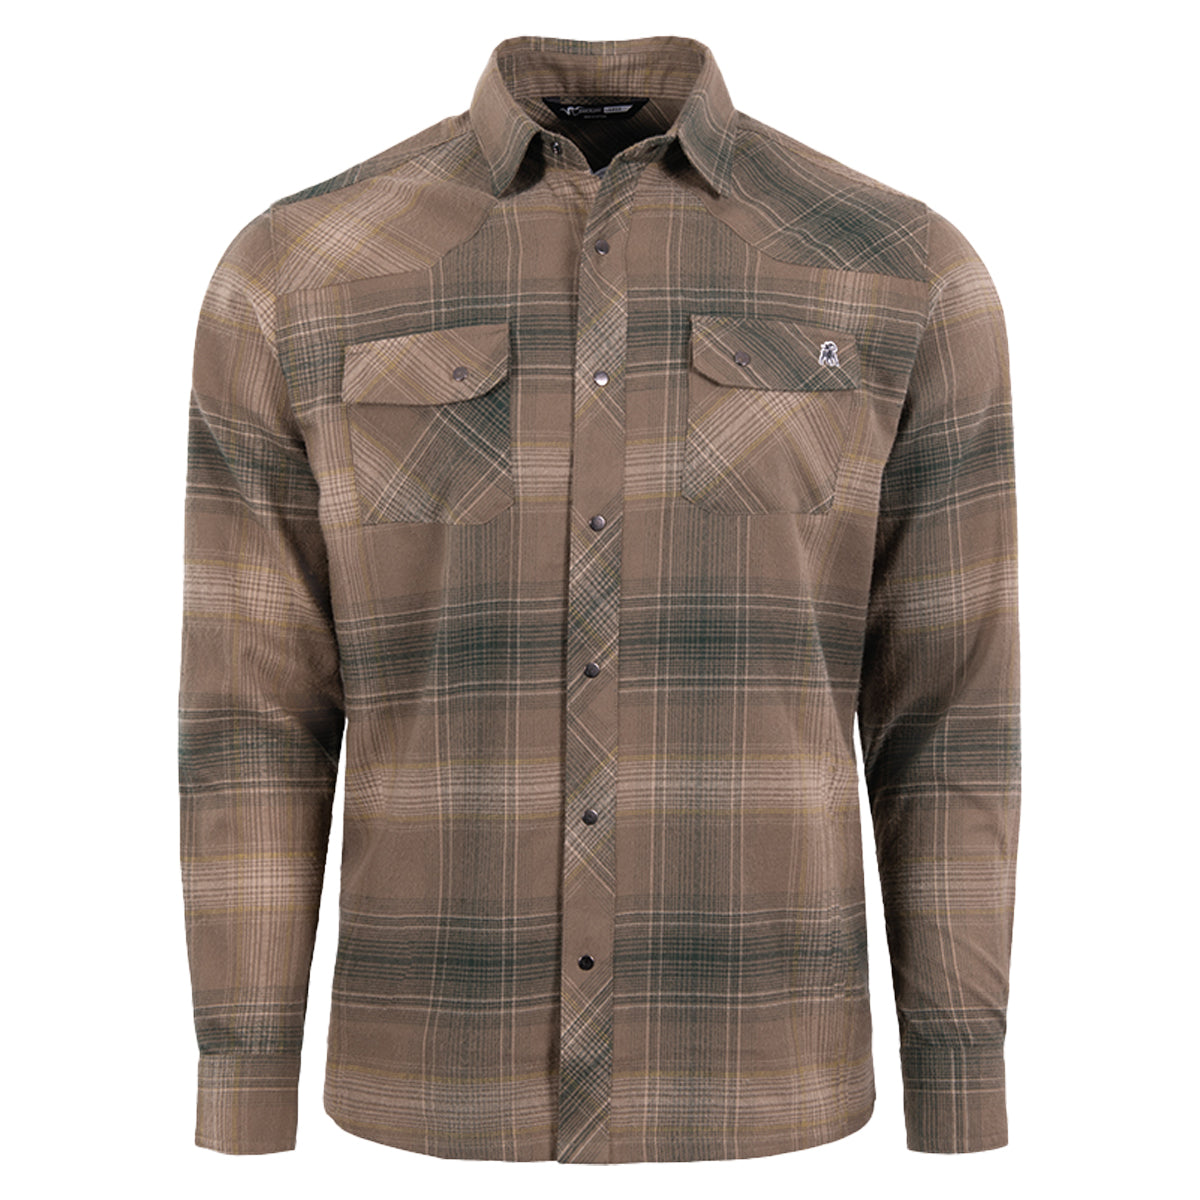 Stone Glacier Timber Butte Snap Shirt in  by GOHUNT | Stone Glacier - GOHUNT Shop